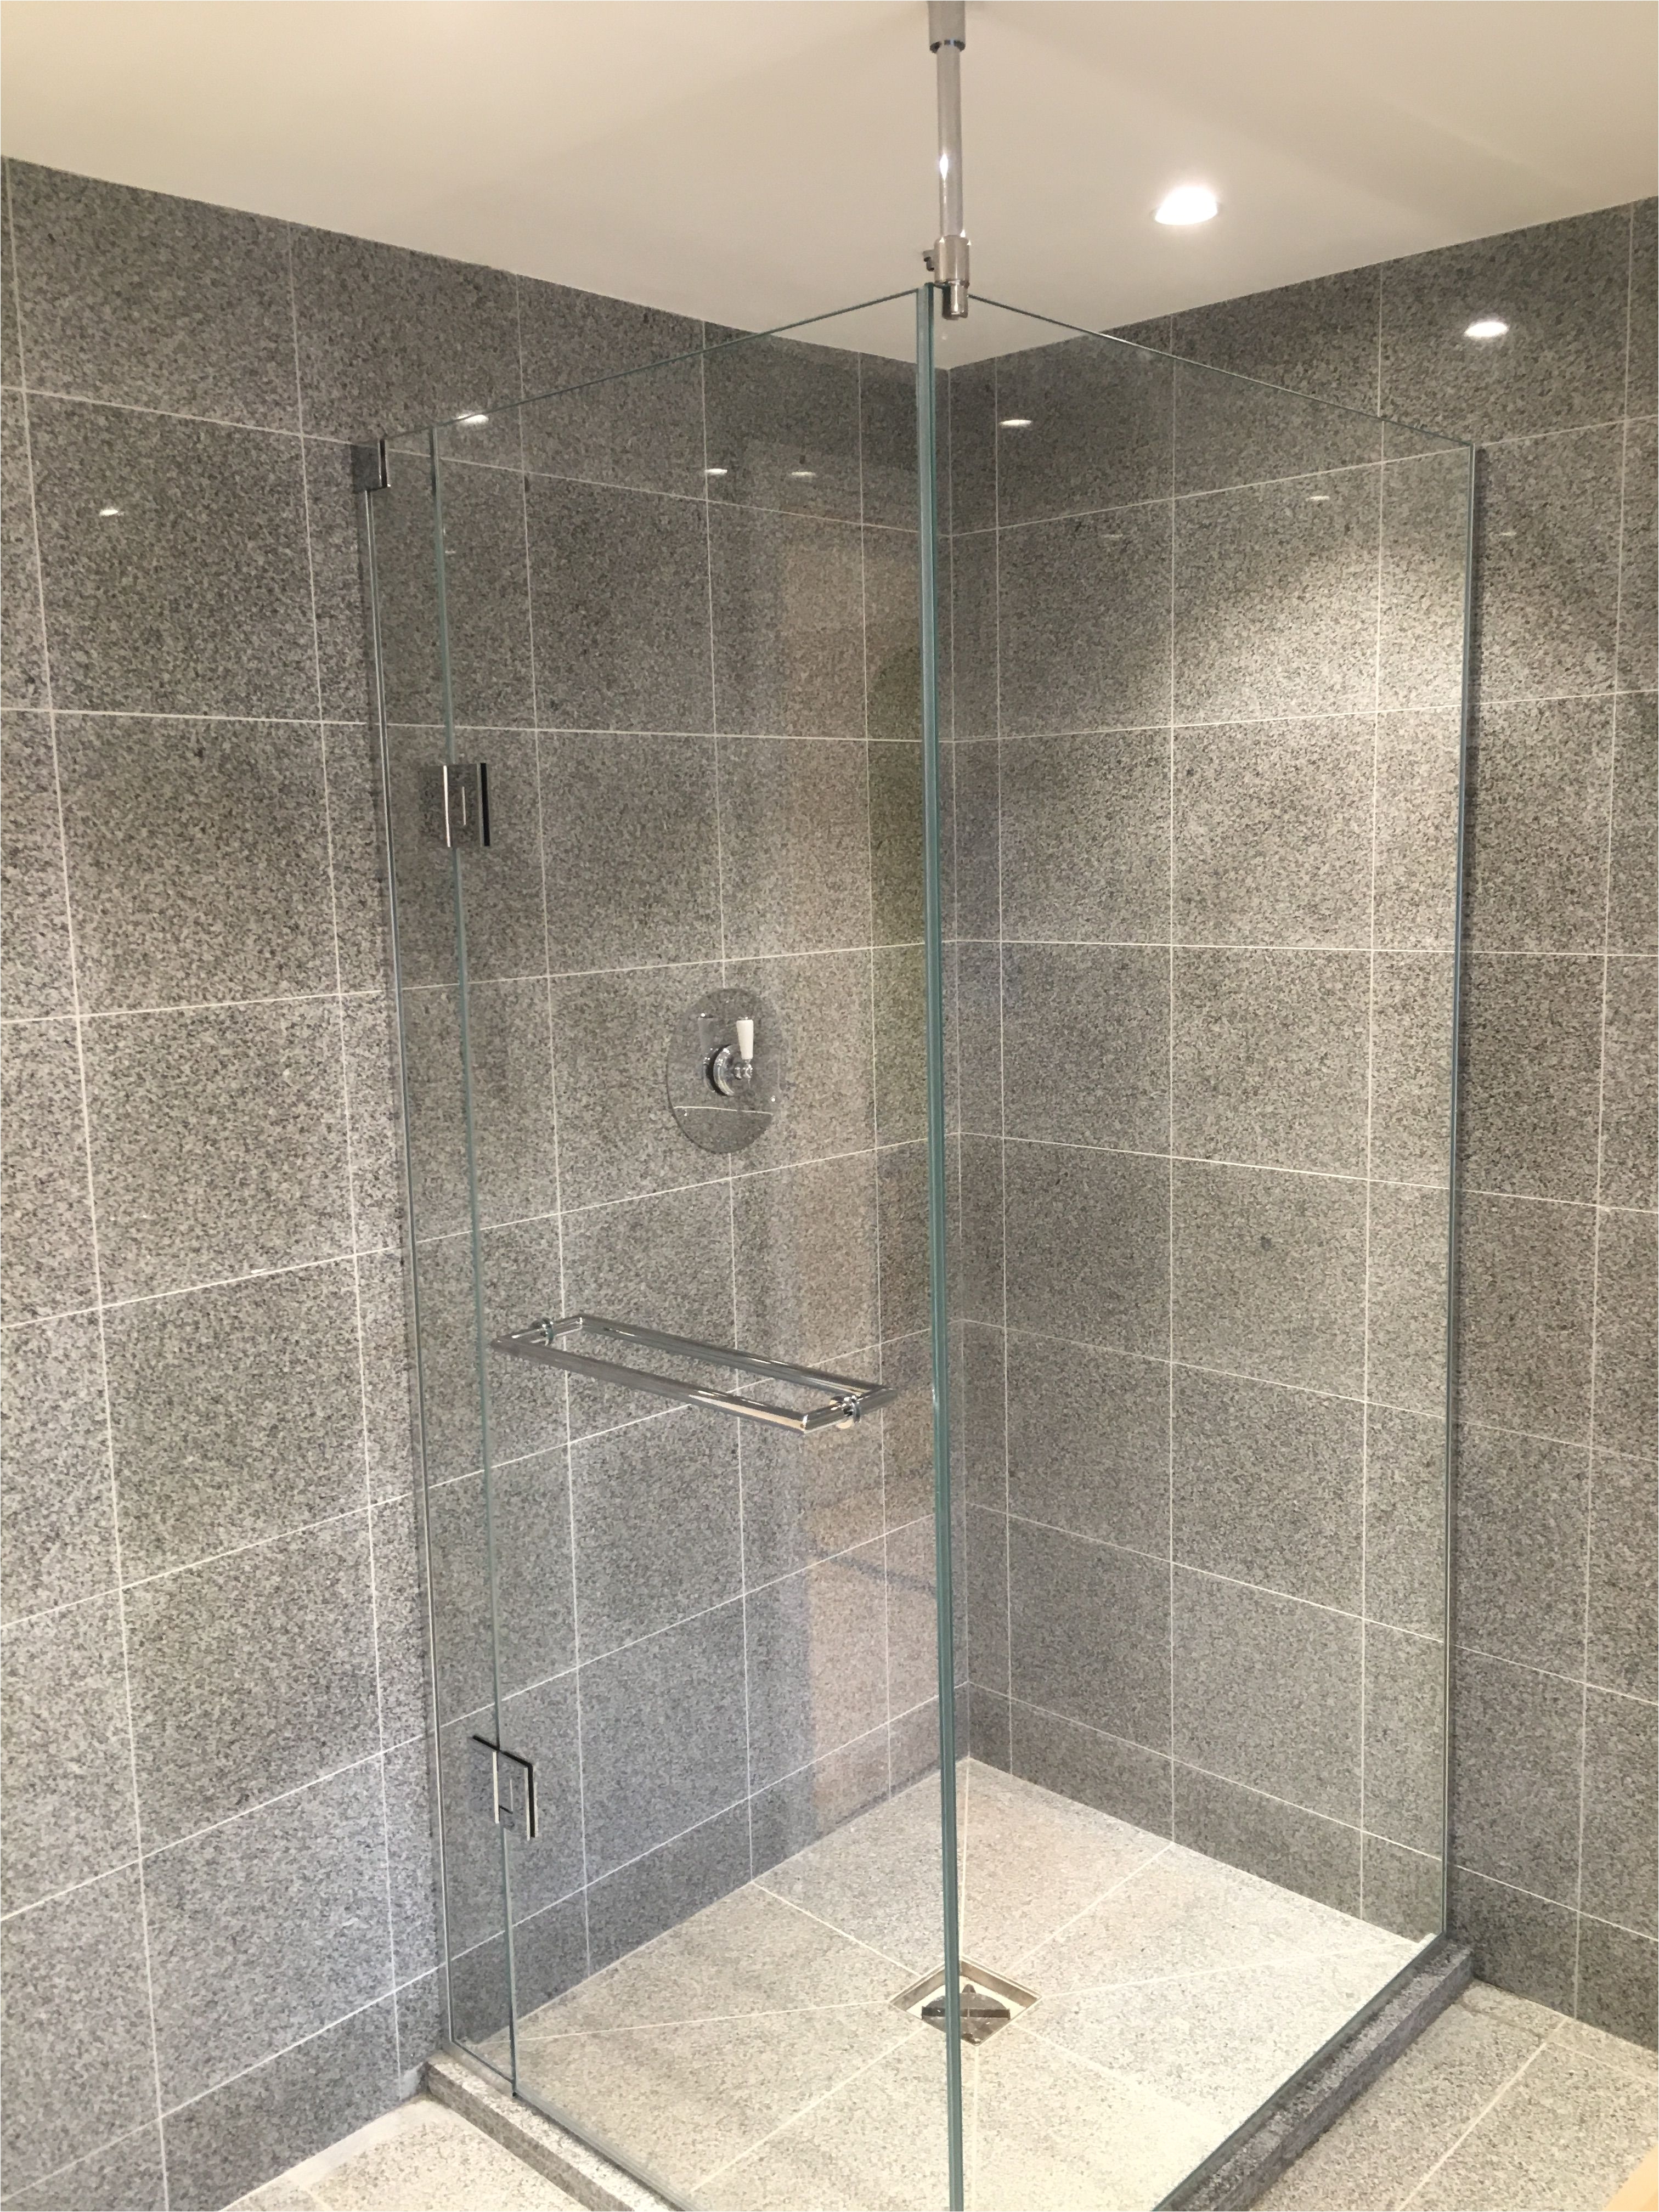 frameless 2 sided shower enclosure in low iron glass with anti limescale coating applied free of charge windsor berkshire